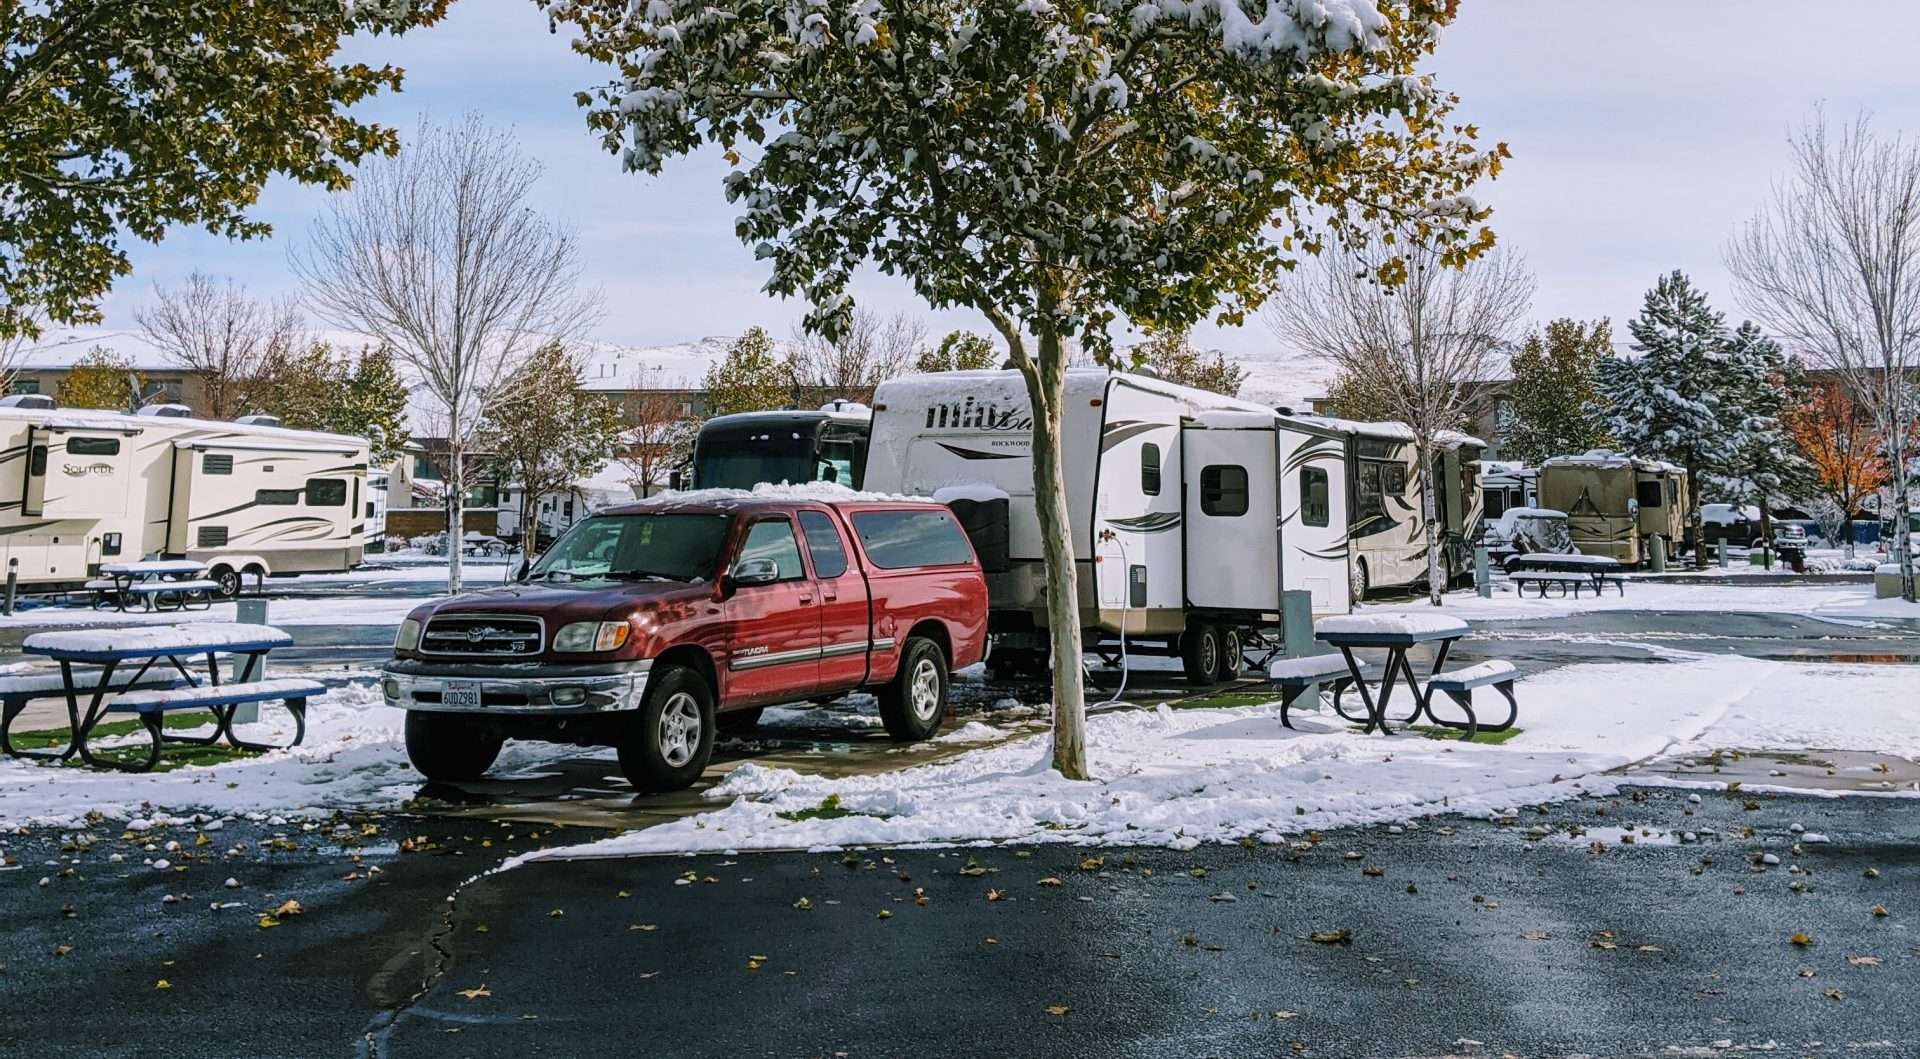 Fifth wheel RV parked in snow camping spot